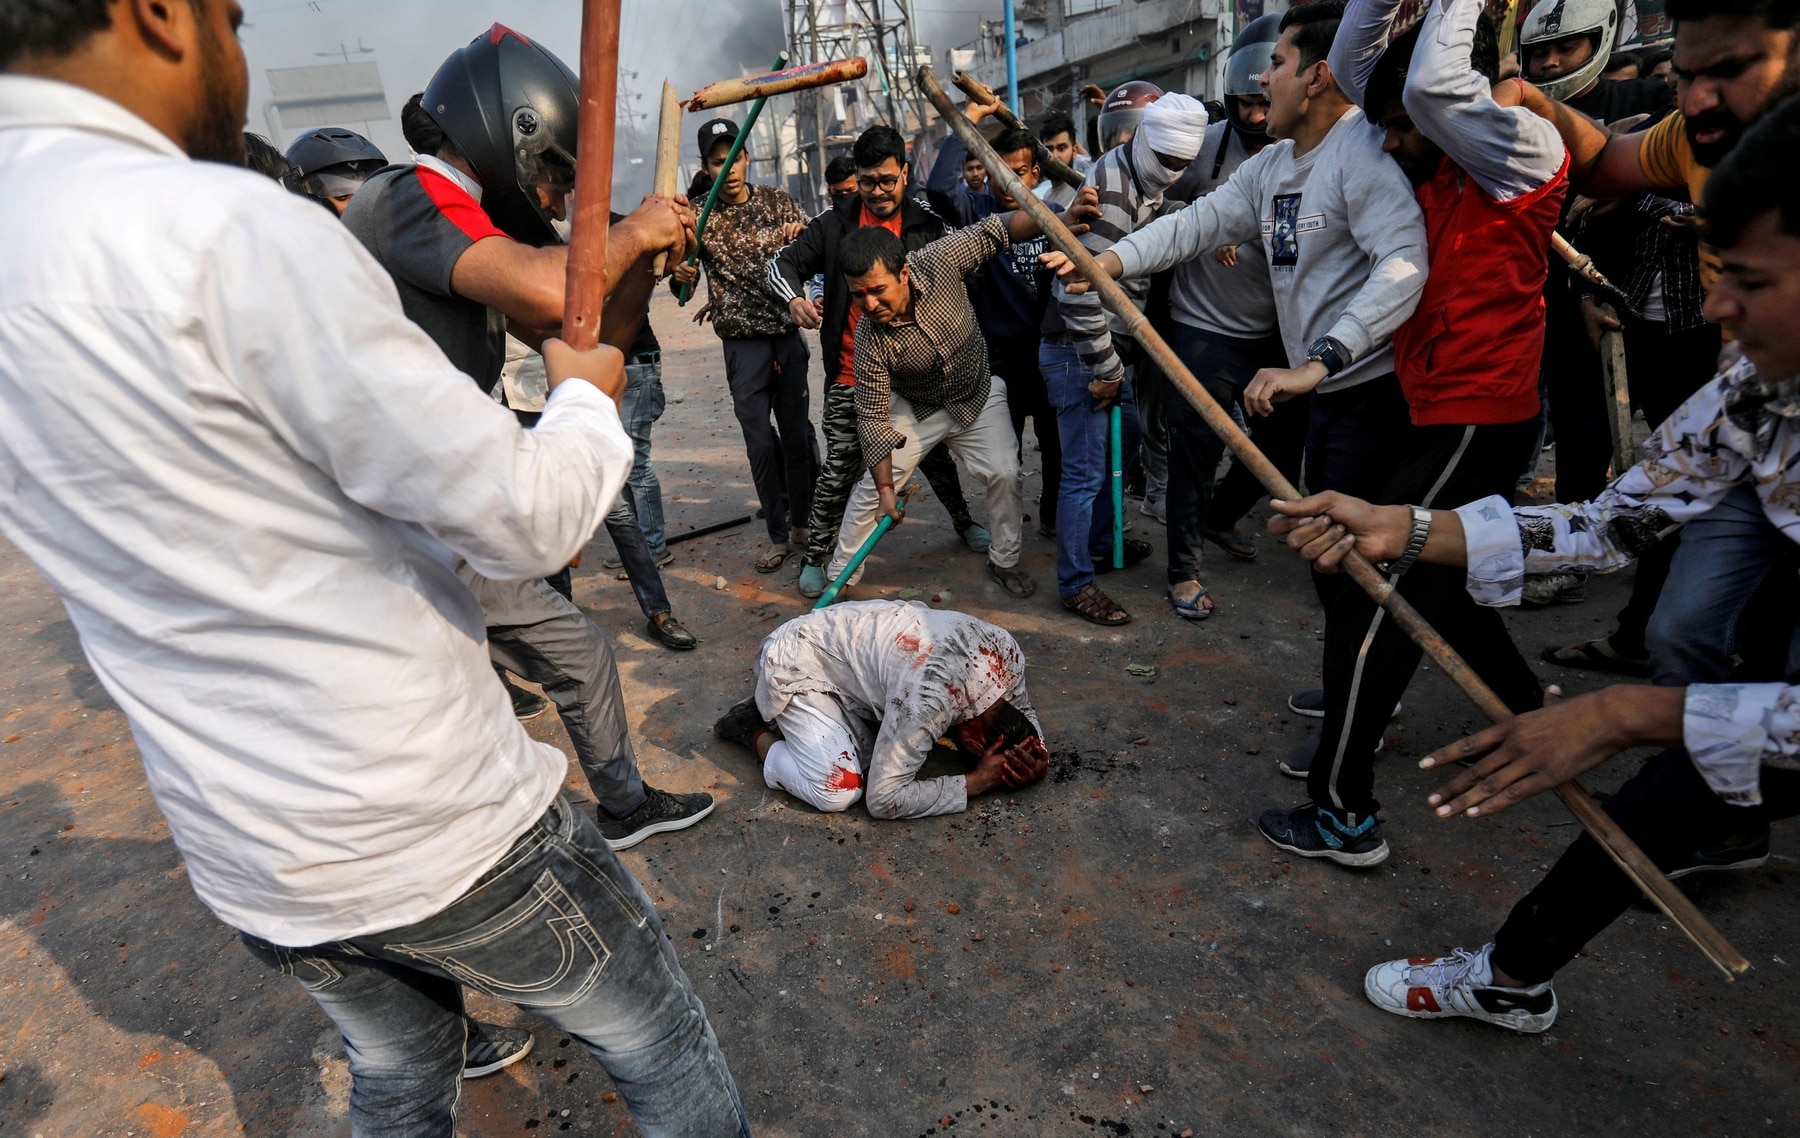 People supporting the new citizenship law beat a Muslim man during a clash with those opposing the law in New Delhi, February 24, 2020. REUTERS/Danish Siddiqui